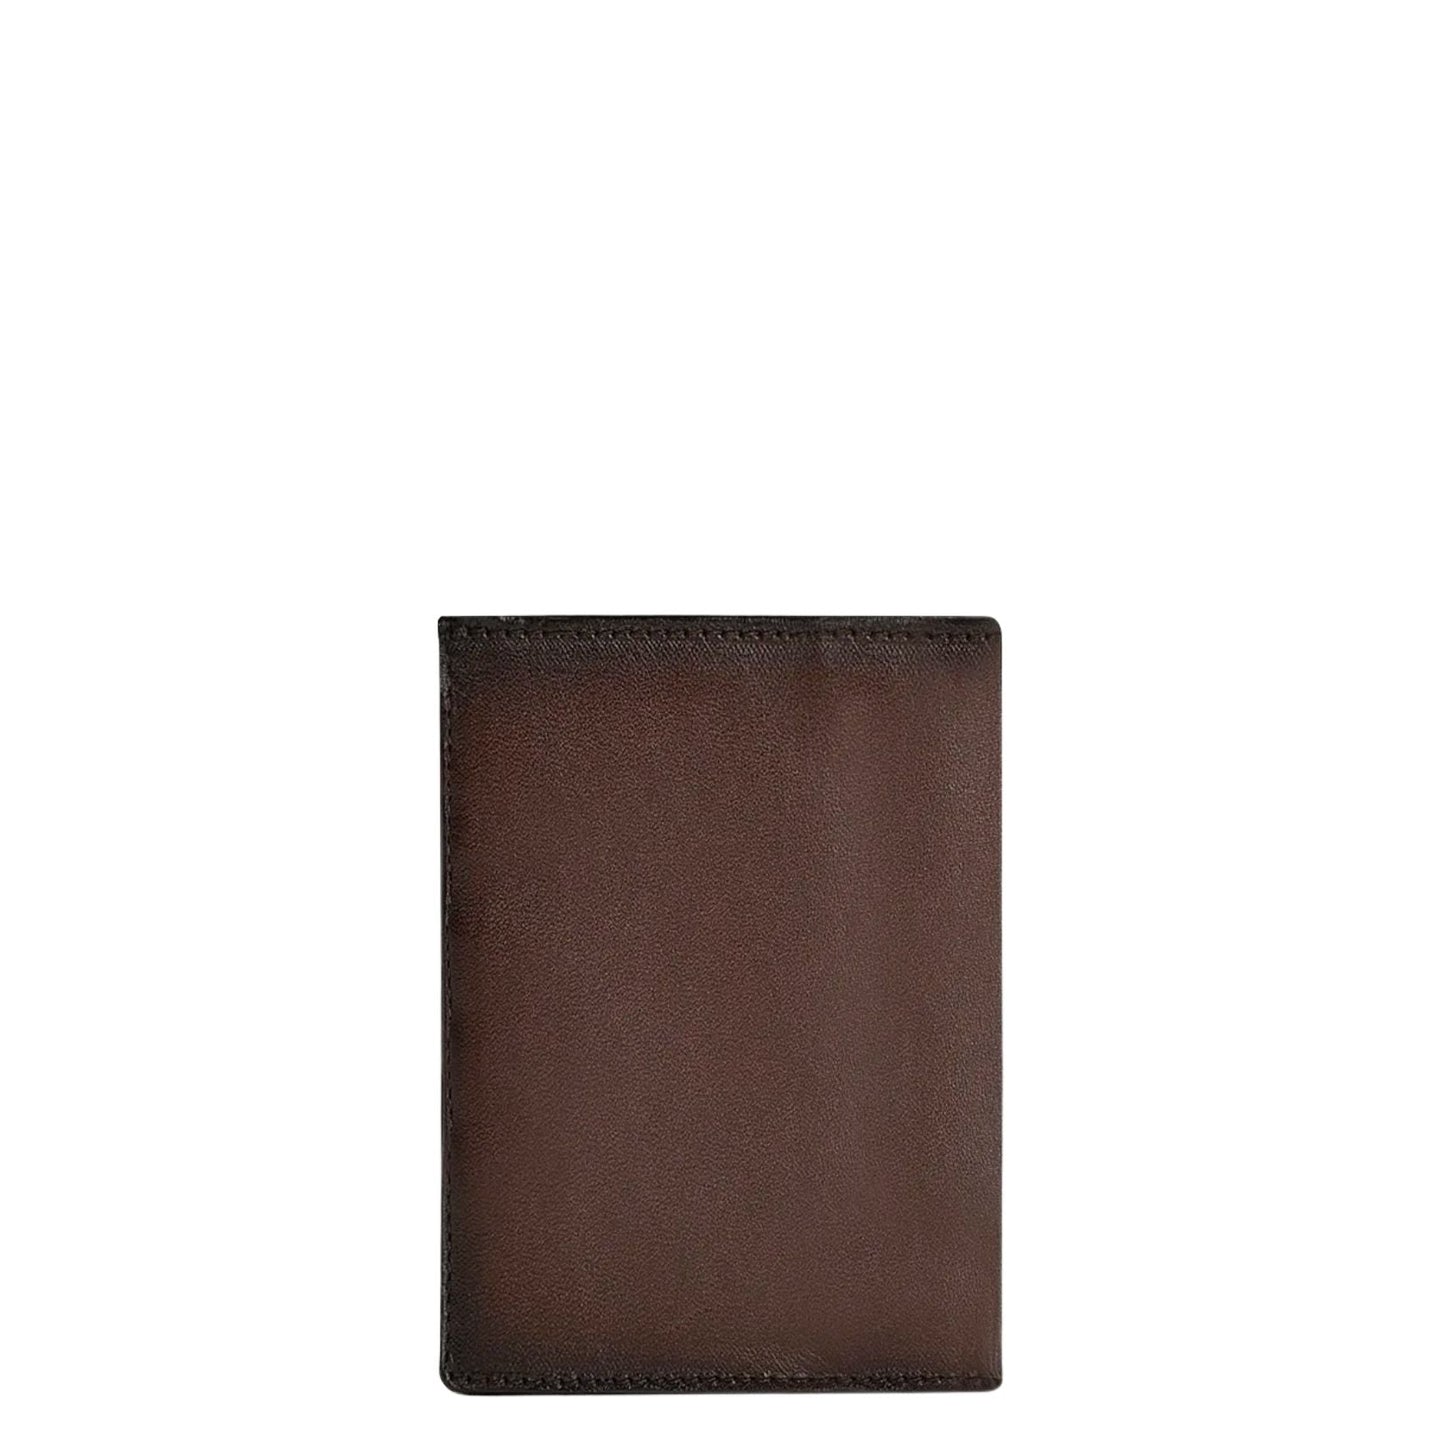 BC011NL - Cuadra maple exotic wallet in niloticus leather for men-Kuet.us